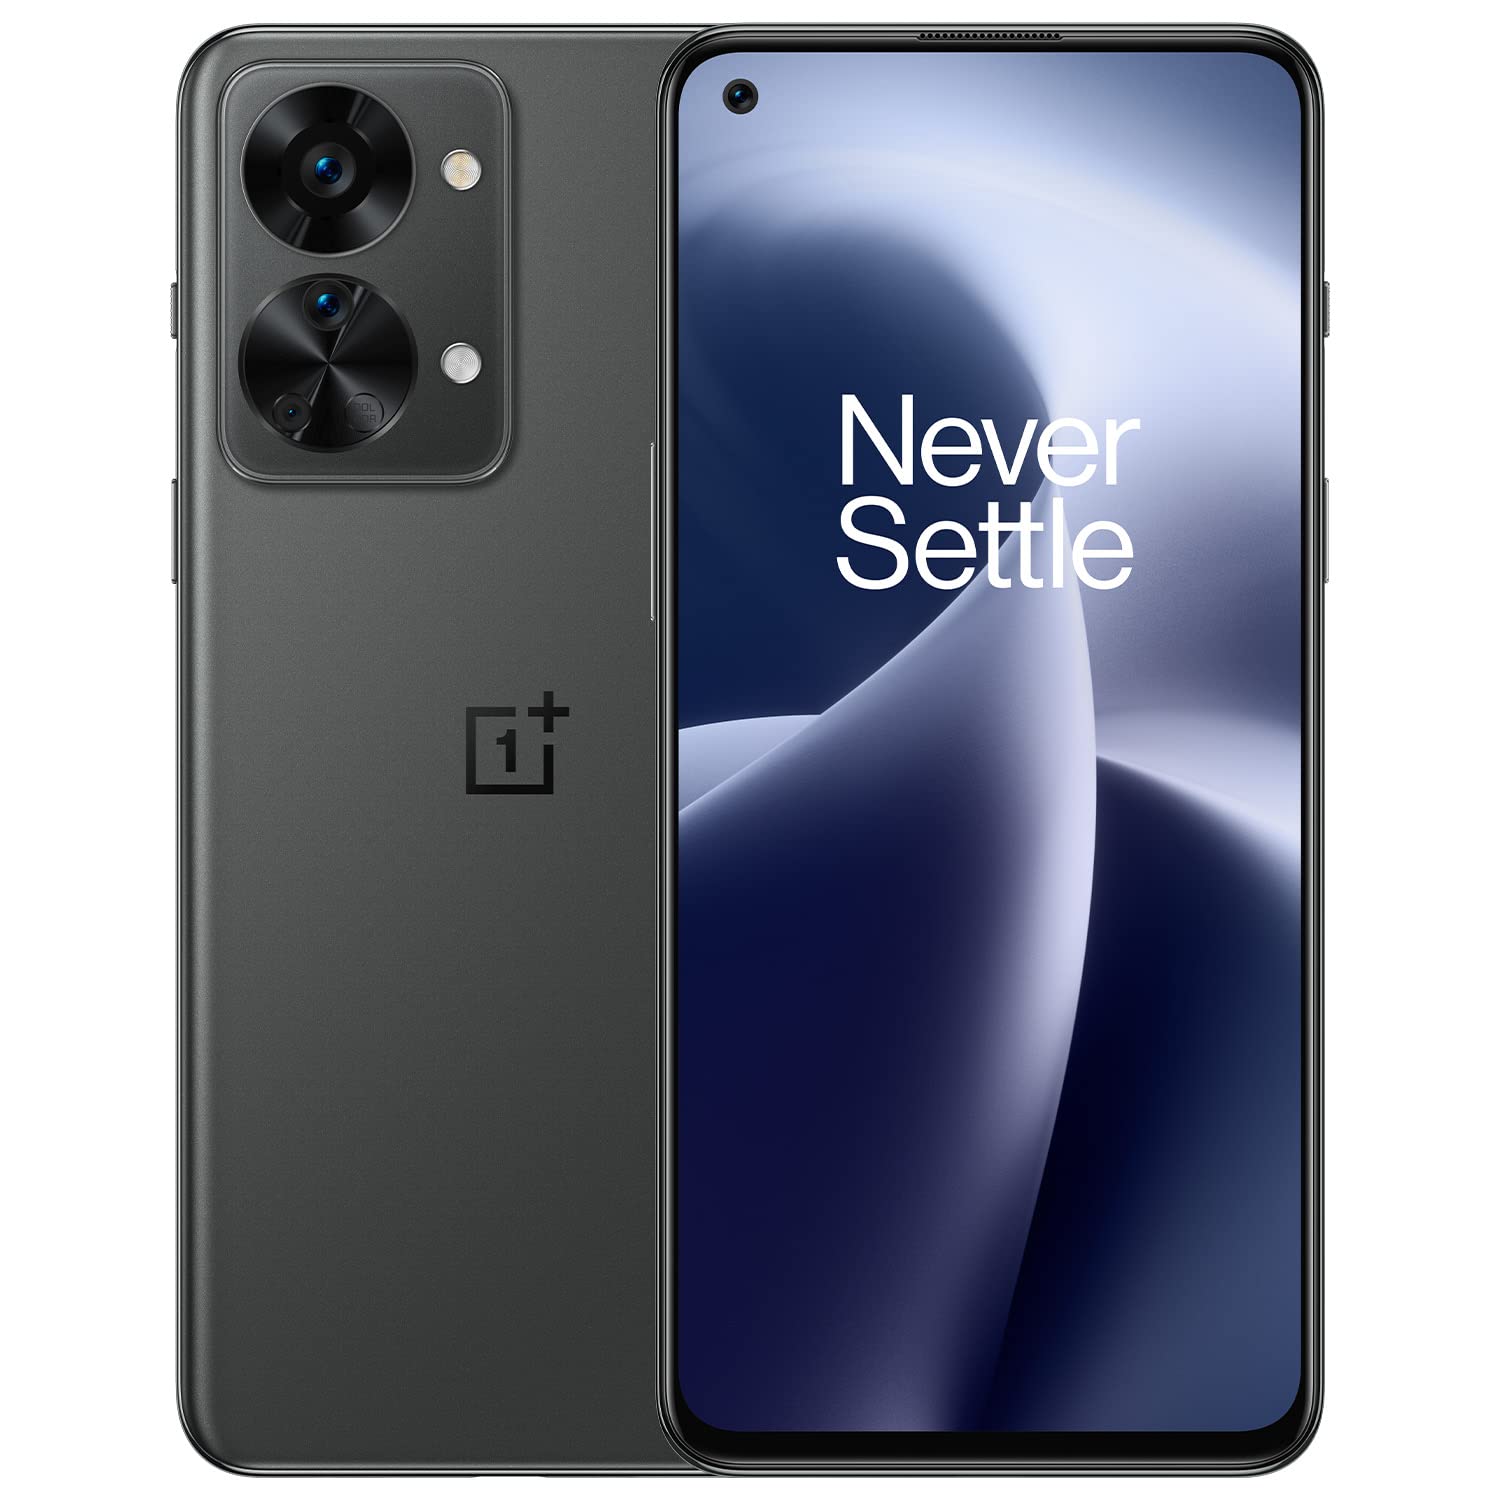 nord 2T feature - Oneplus Nord 2T Price, Review, And Specifications